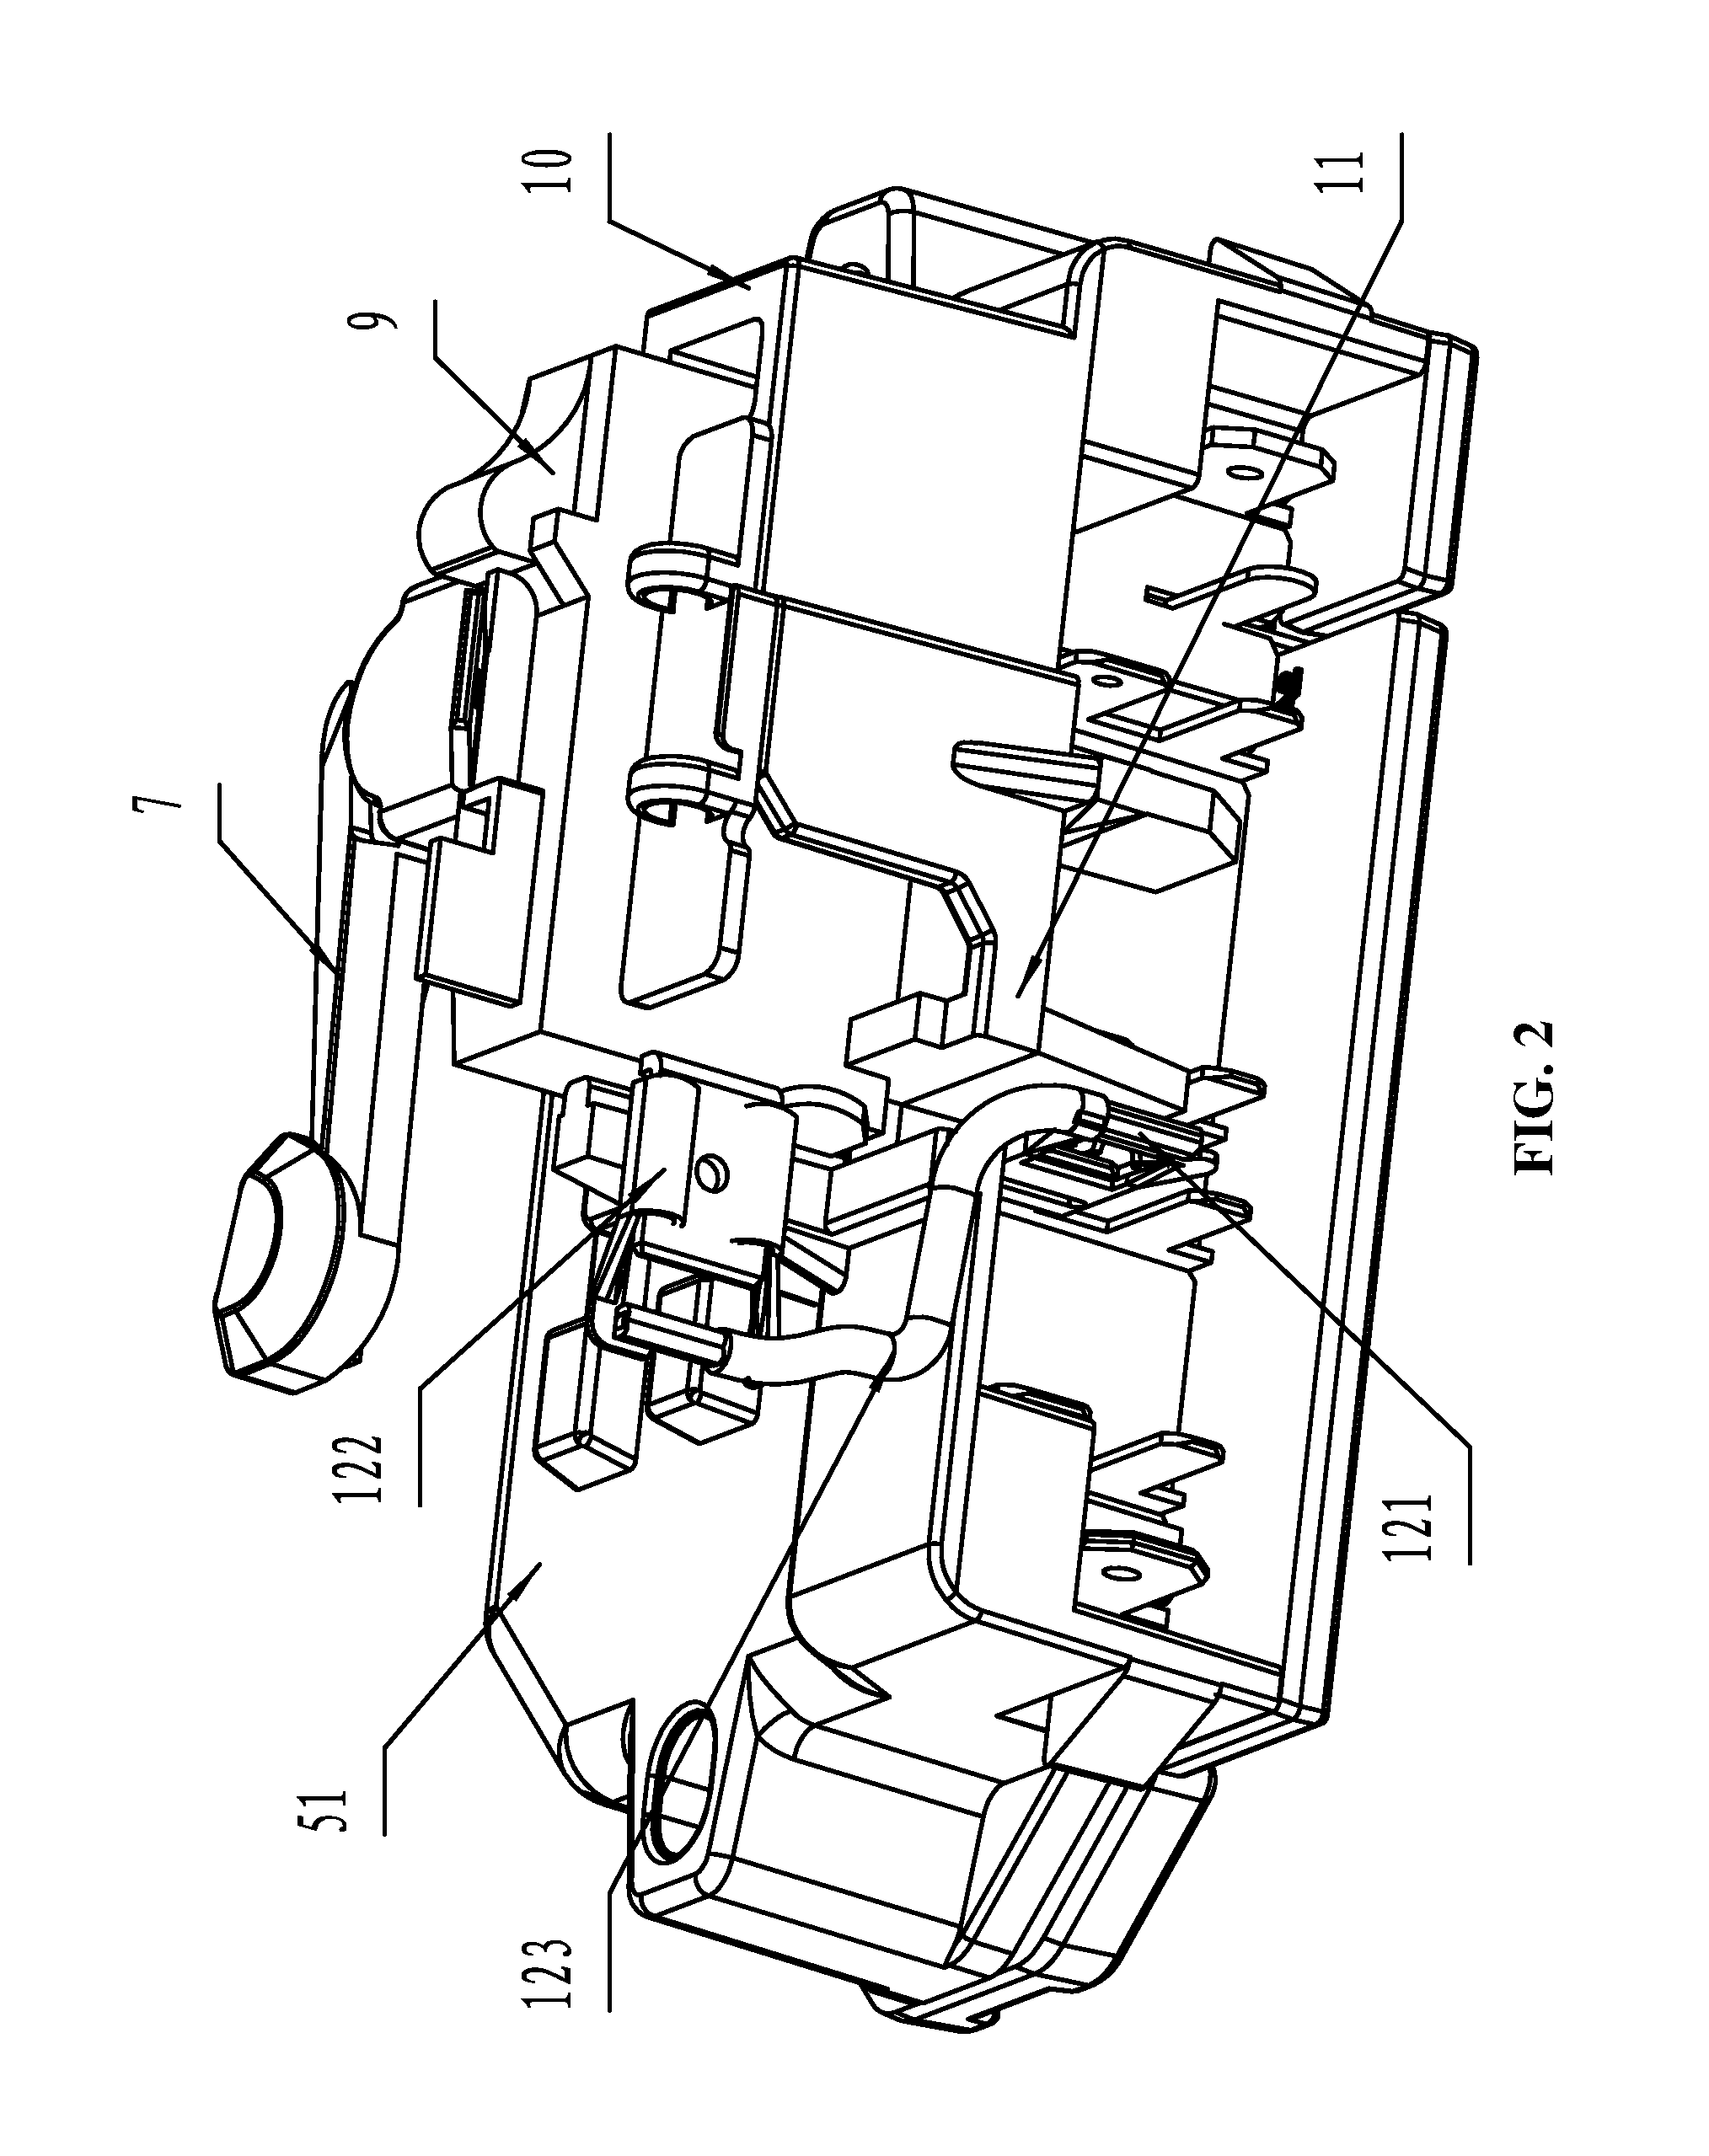 Terminal box for centrifugal switch of motor and motor with the same